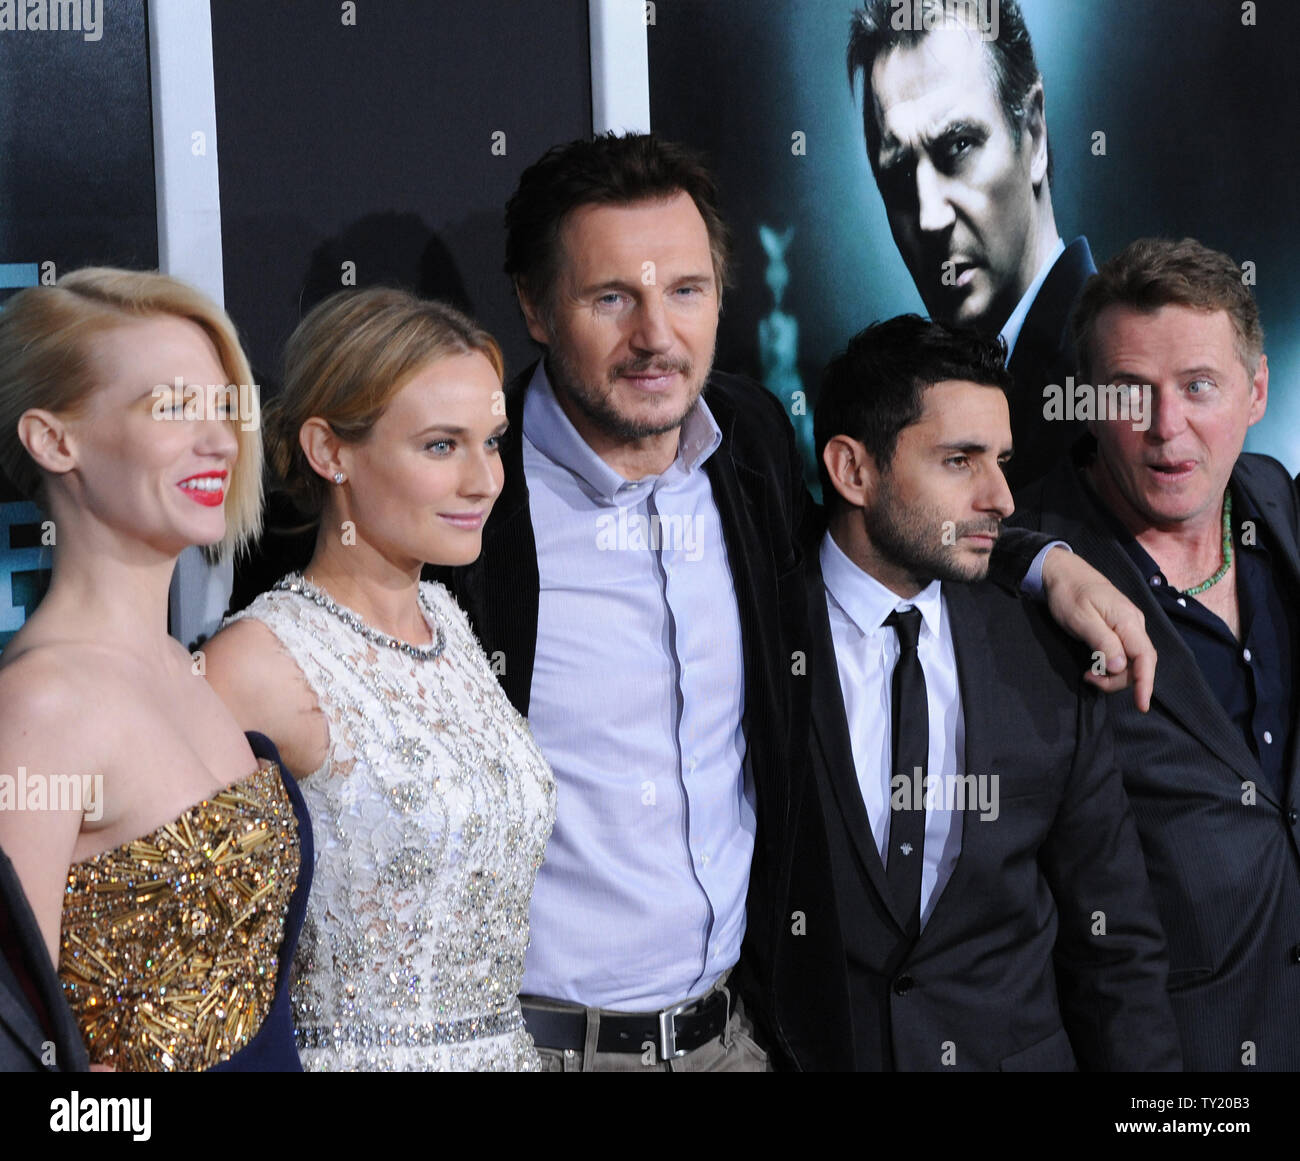 Jaume Collet-Serra (4th-L) , who directed the motion picture thriller 'Unknown', poses with cast members January Jones, Diane Kruger, Liam Neeson, (Collet-Serra) and Aidan Quinn (L-R) on the red carpet during the premiere of the film at The Mann Village Theatre in Los Angeles on February 16, 2011.  UPI/Jim Ruymen Stock Photo